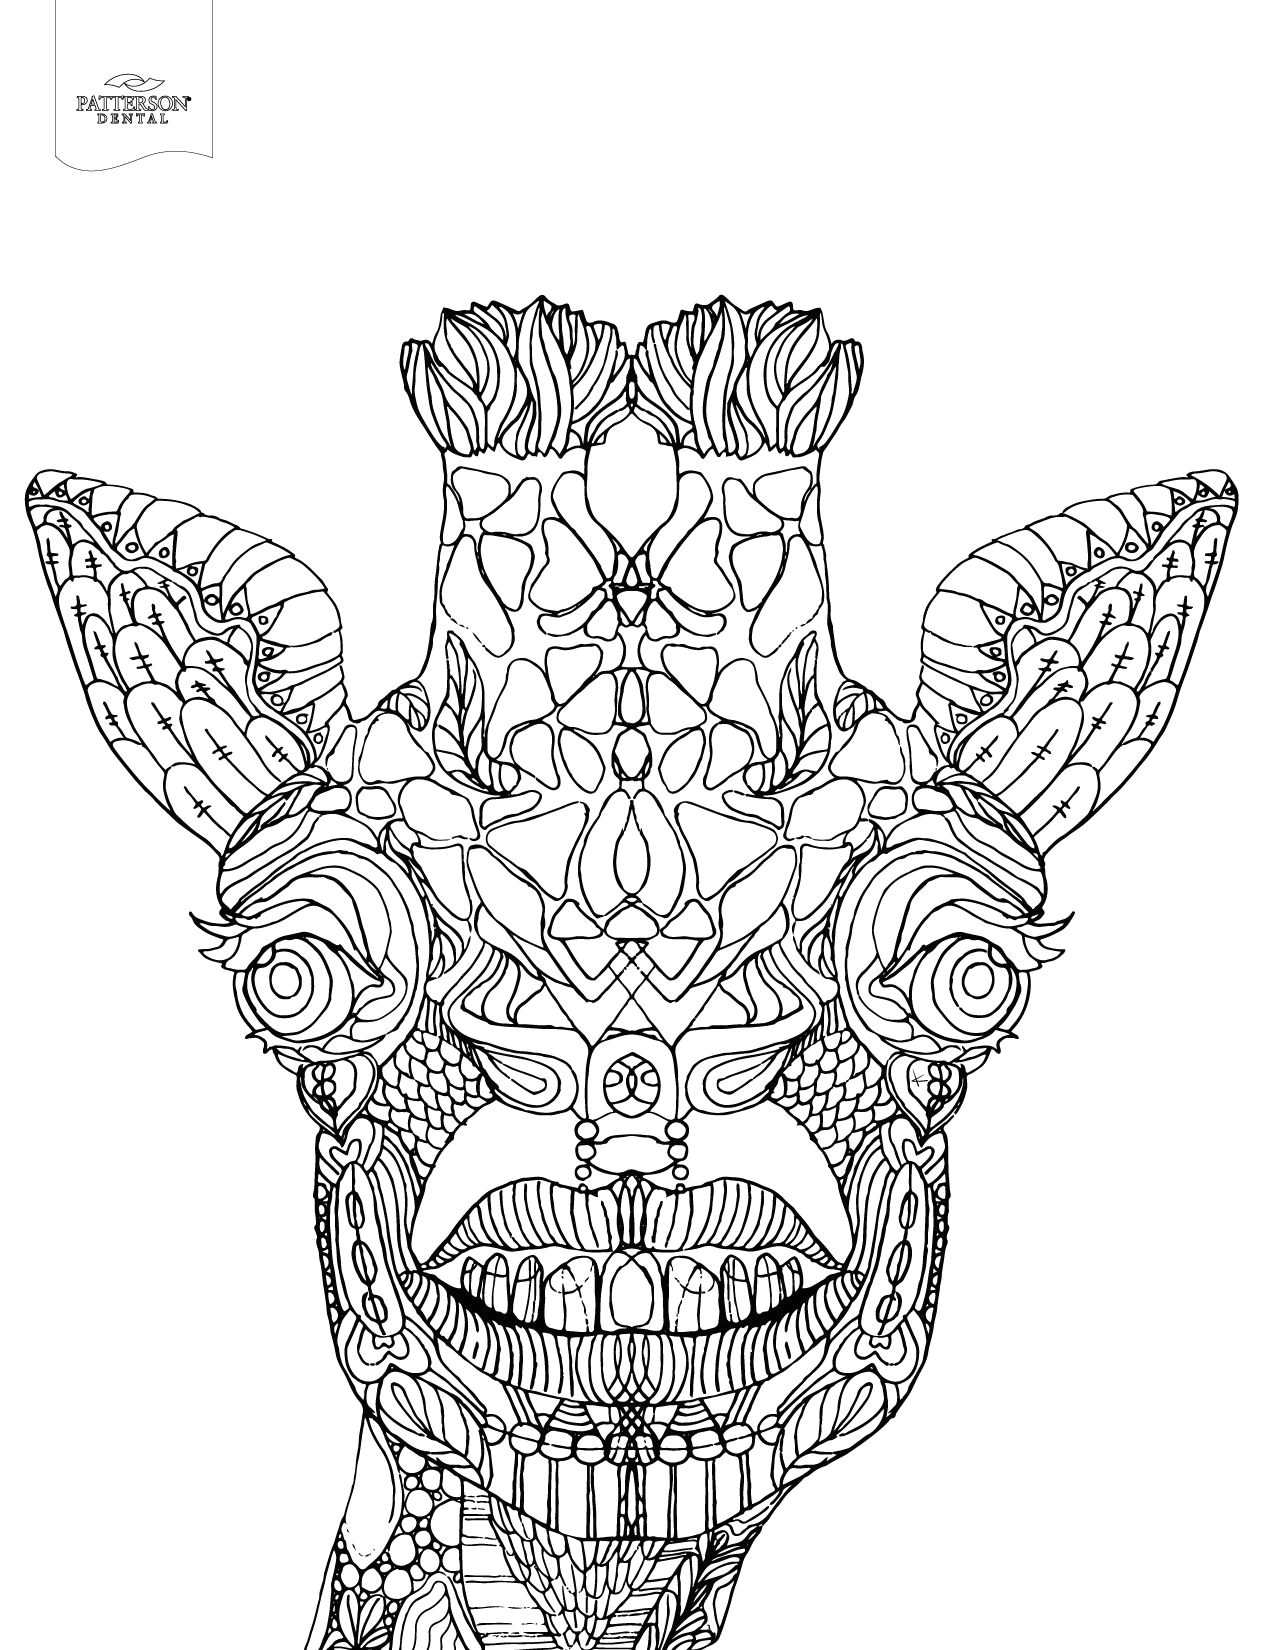 toothy giraffe adult coloring book page fun fact did you know that giraffes only have bottom teeth